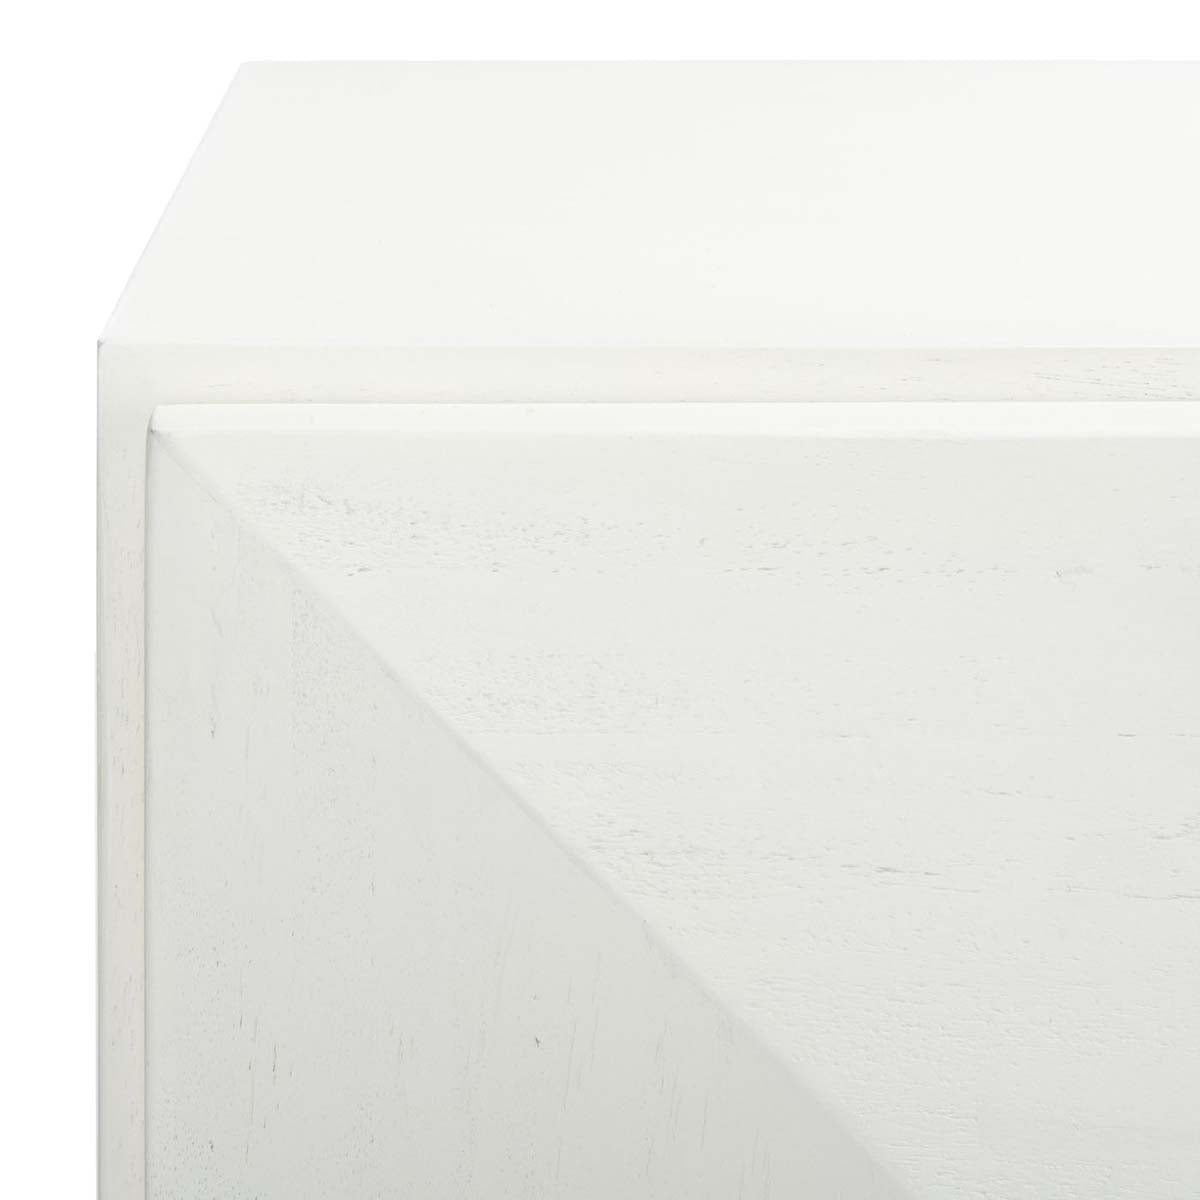 Safavieh Couture Jennings Carved Wood Sideboard - White